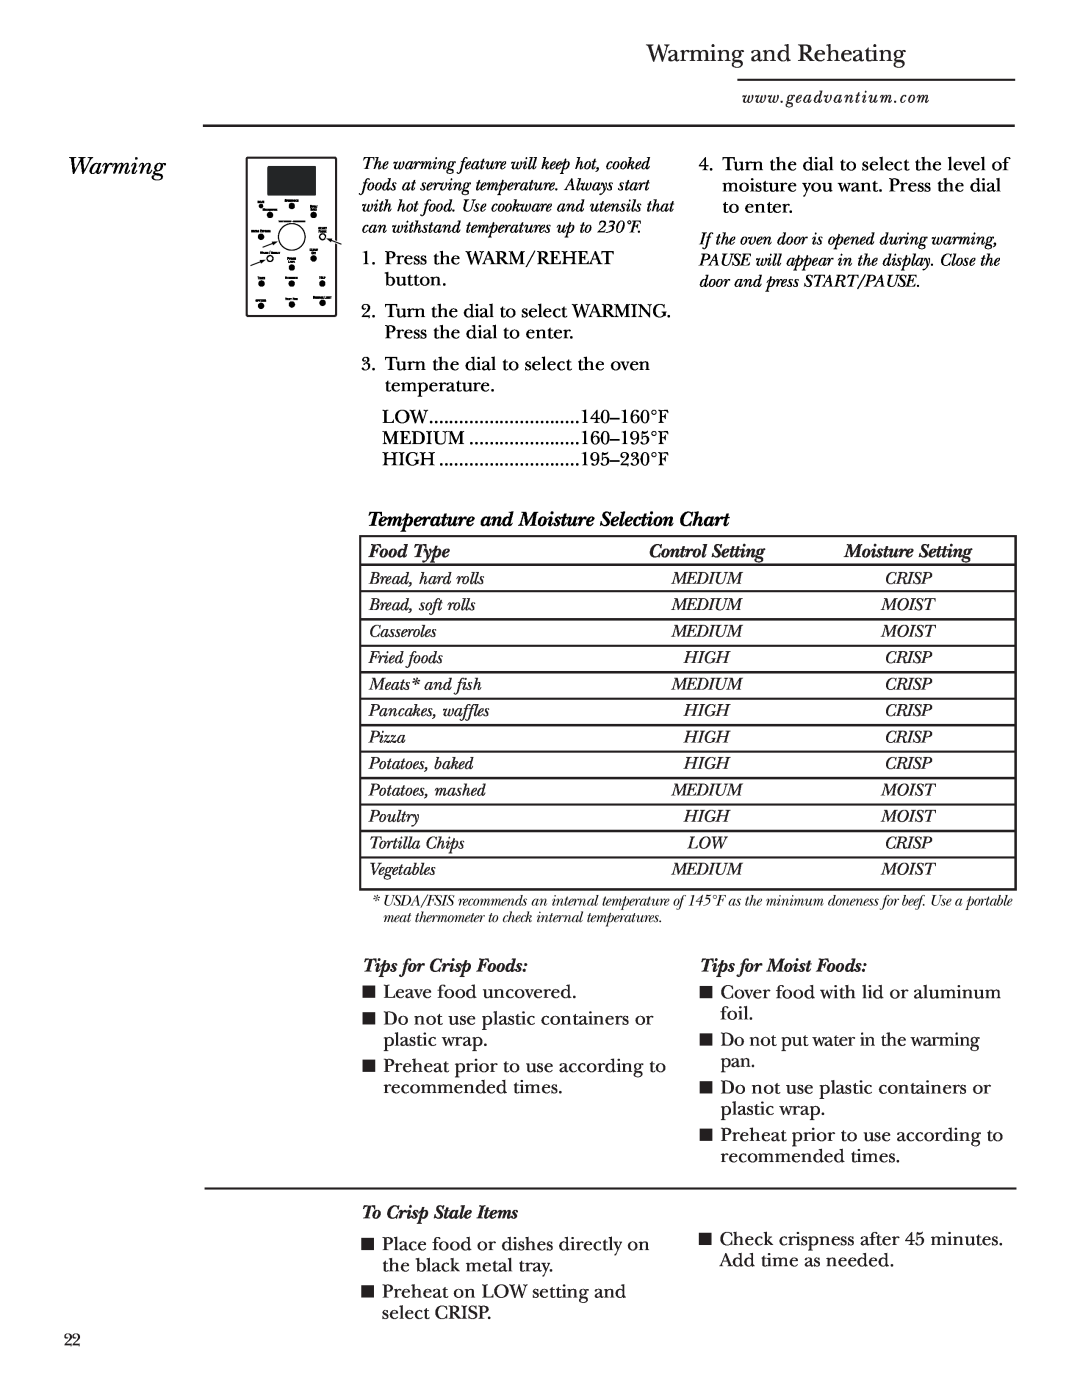 GE SCA1000, SCA1001 owner manual Warming and Reheating, Temperature and Moisture Selection Chart 